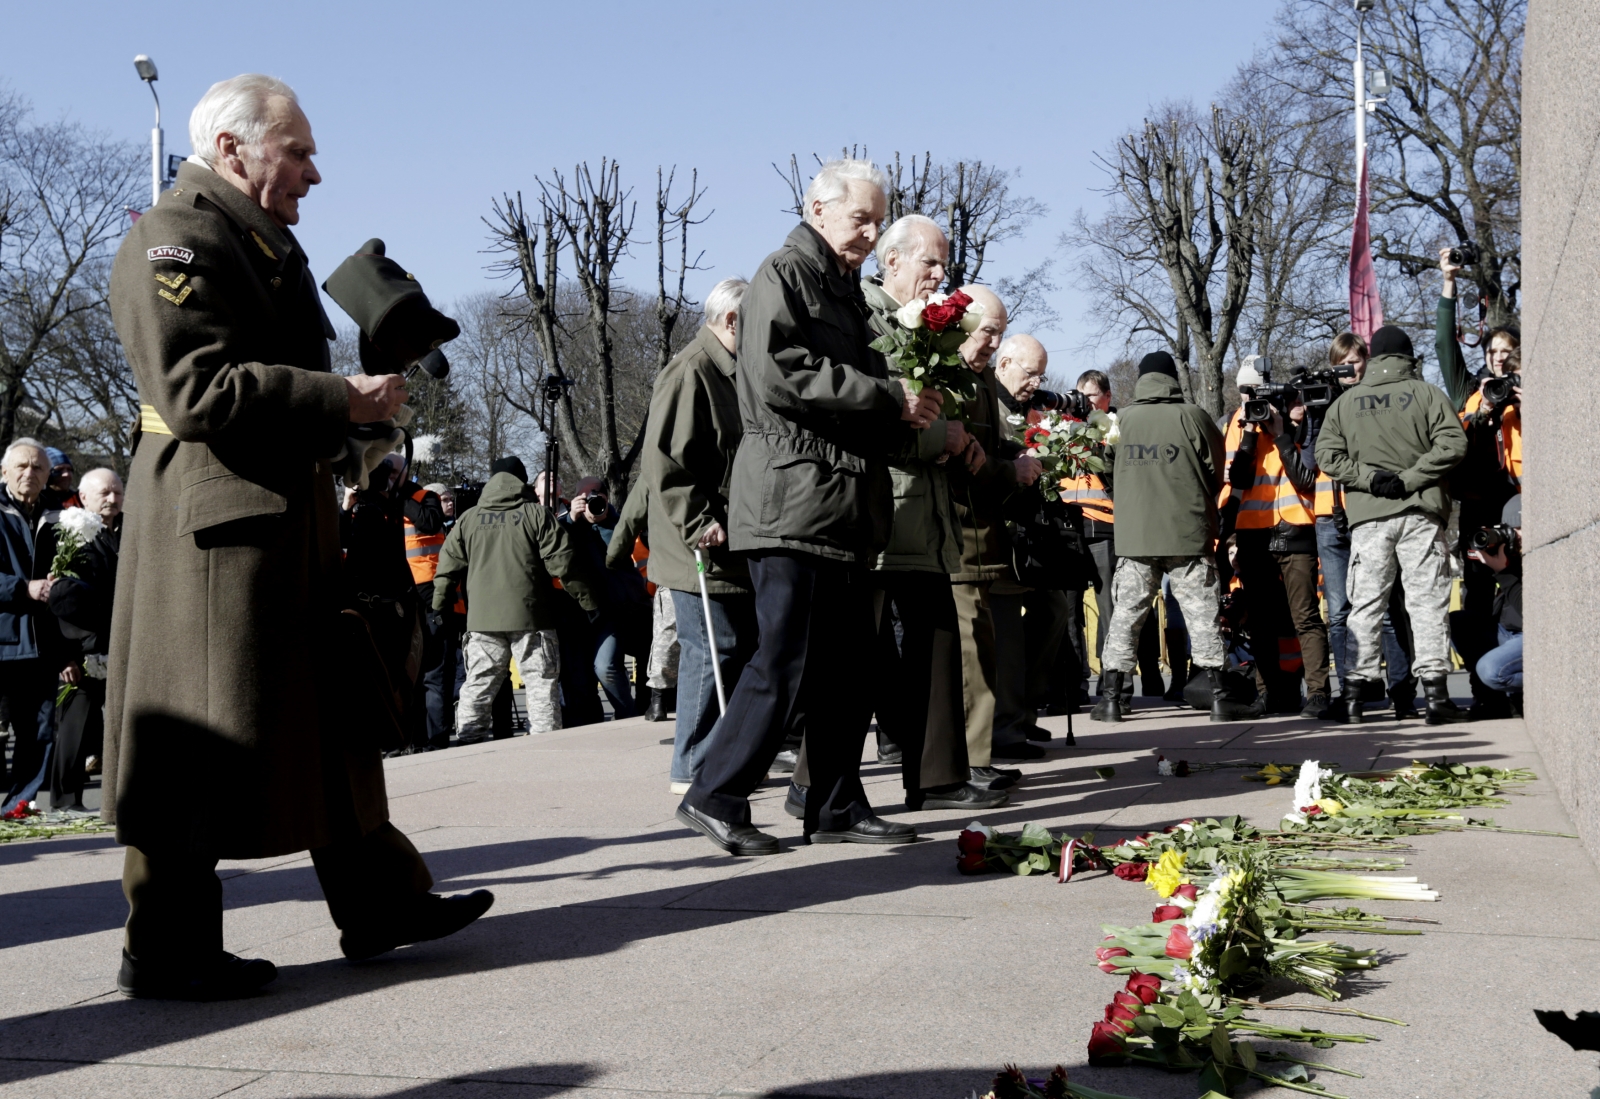 Latvia March By Nazi Veterans Stokes Up More Tension Between Russia